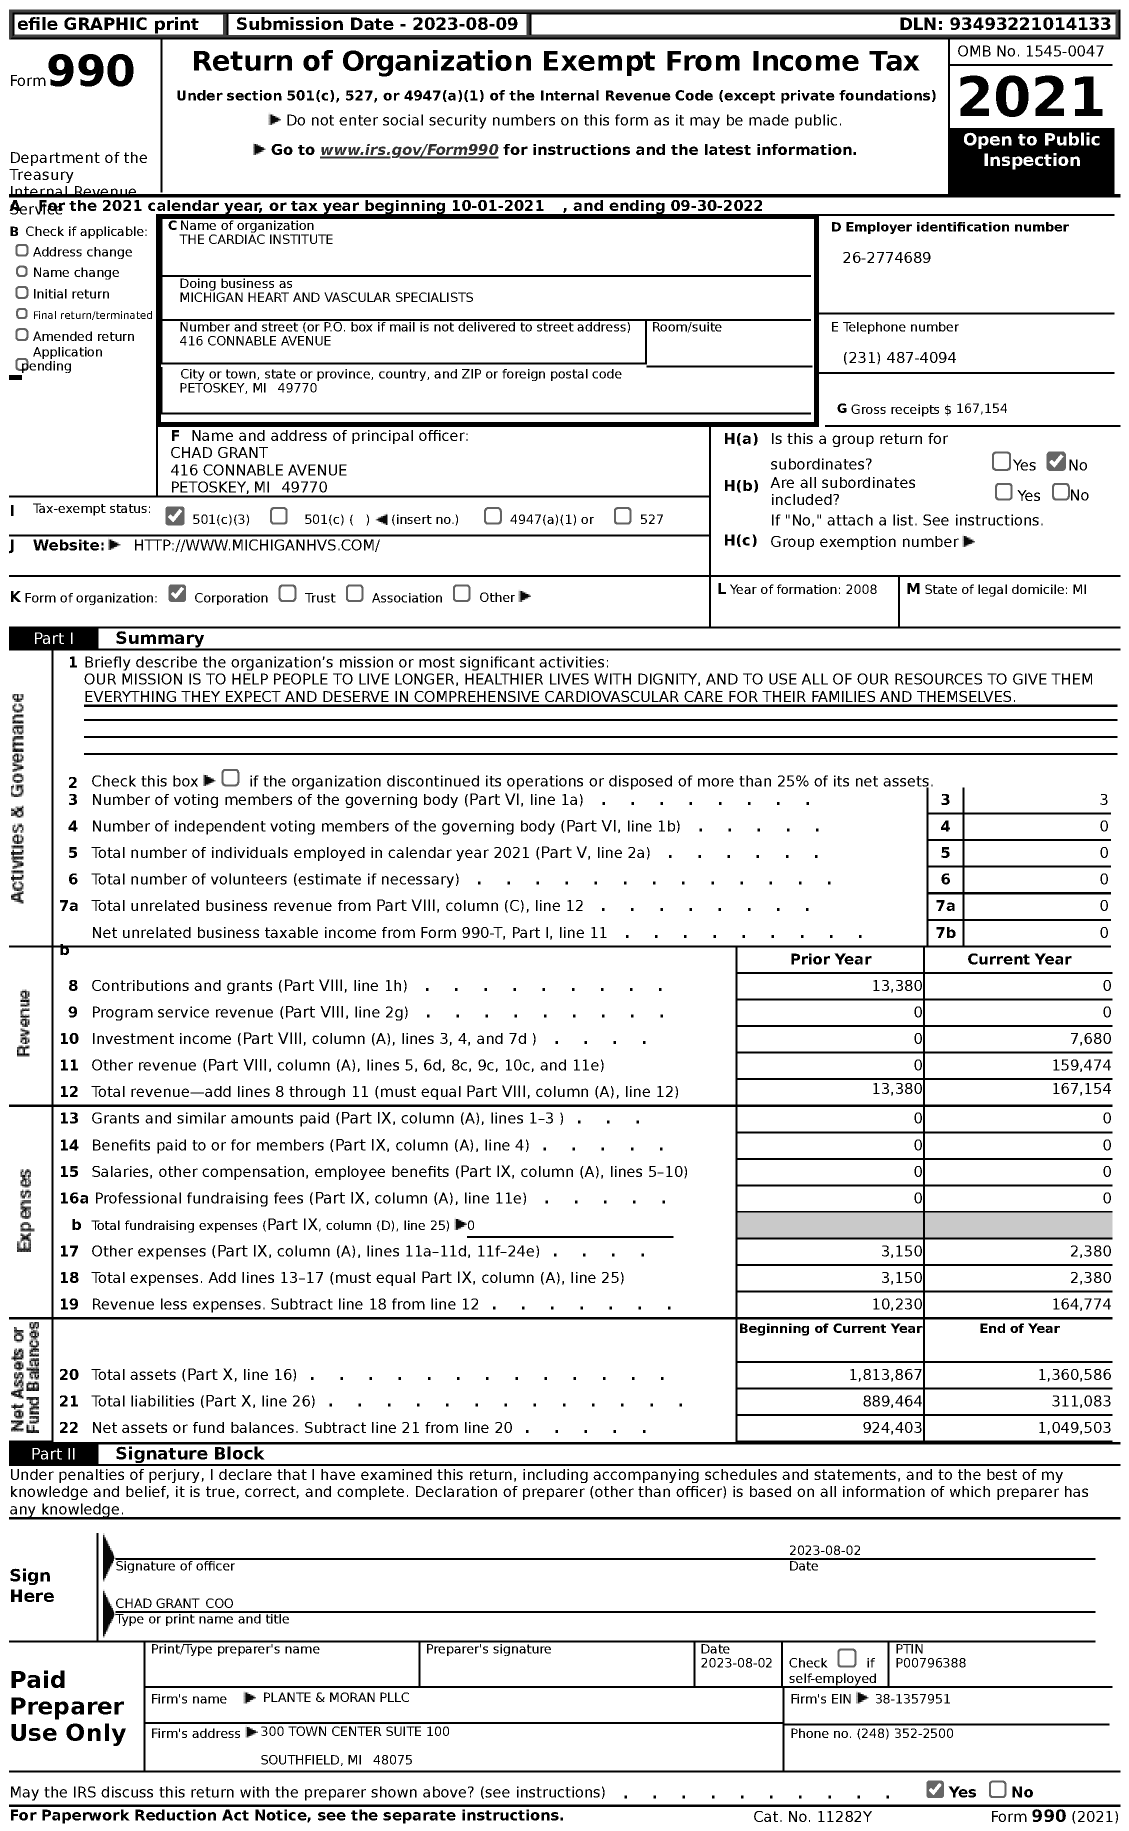 Image of first page of 2021 Form 990 for Michigan Heart and Vascular Specialists